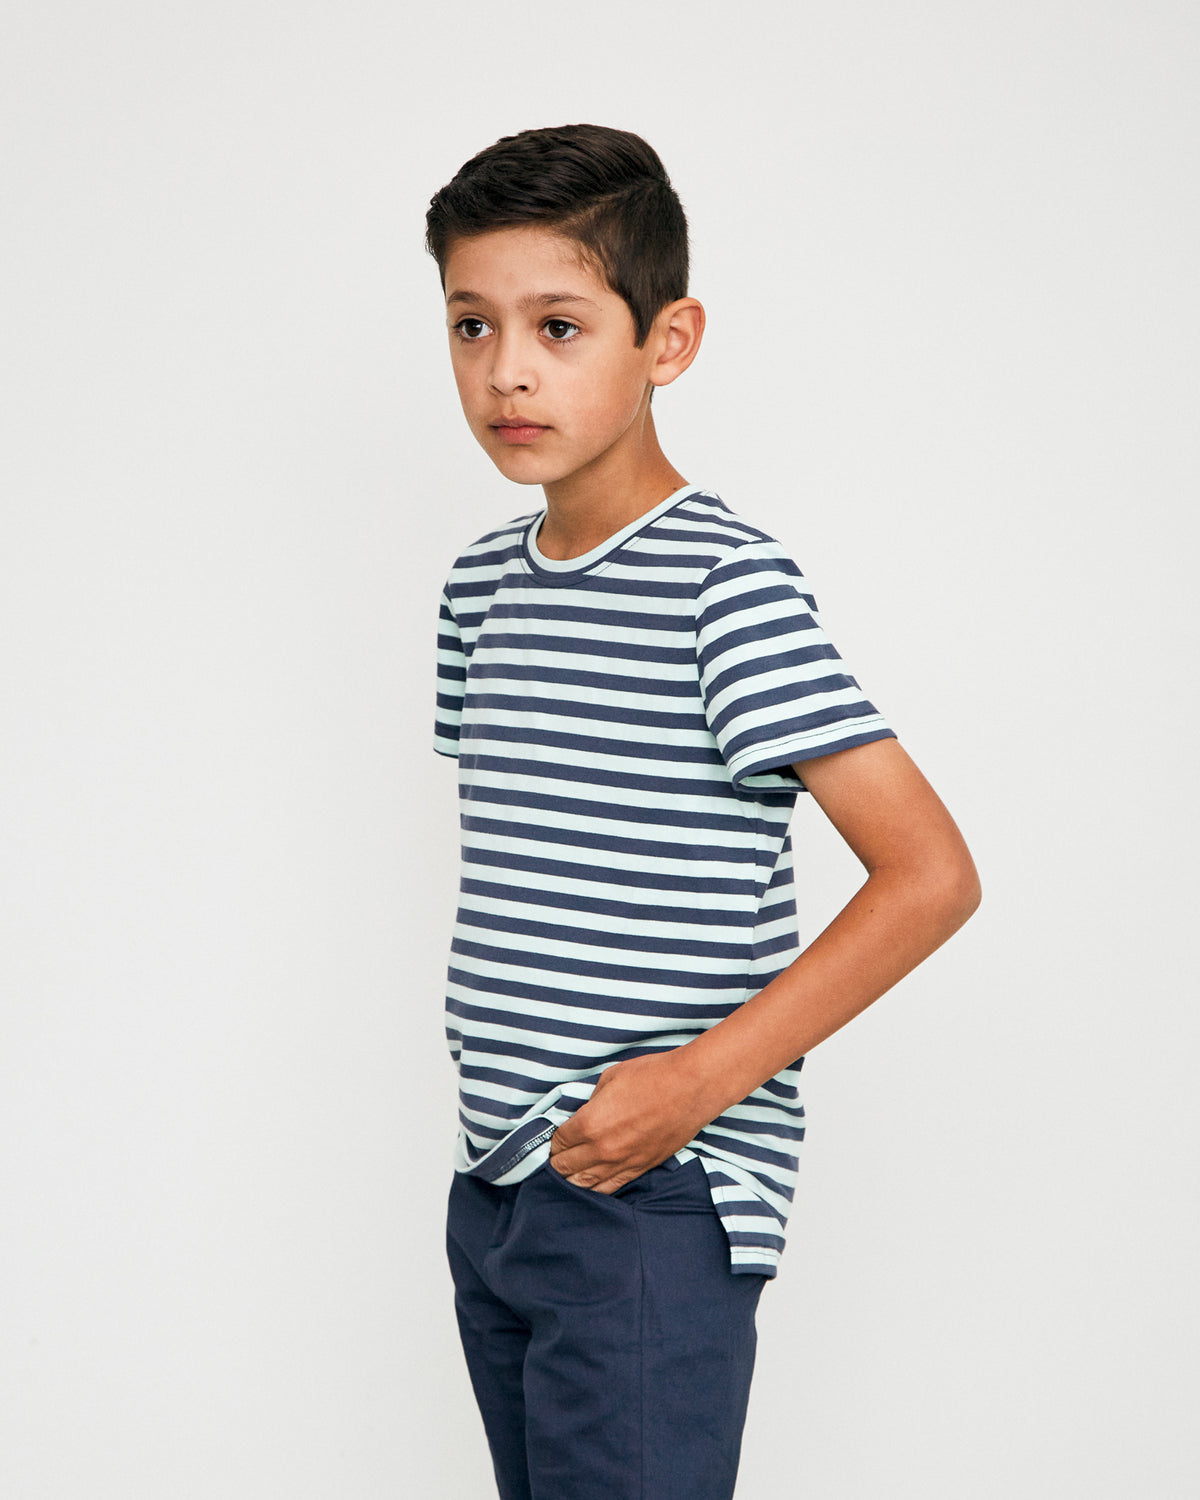 Buddy Tall Tee in Navy and Blue Stripe